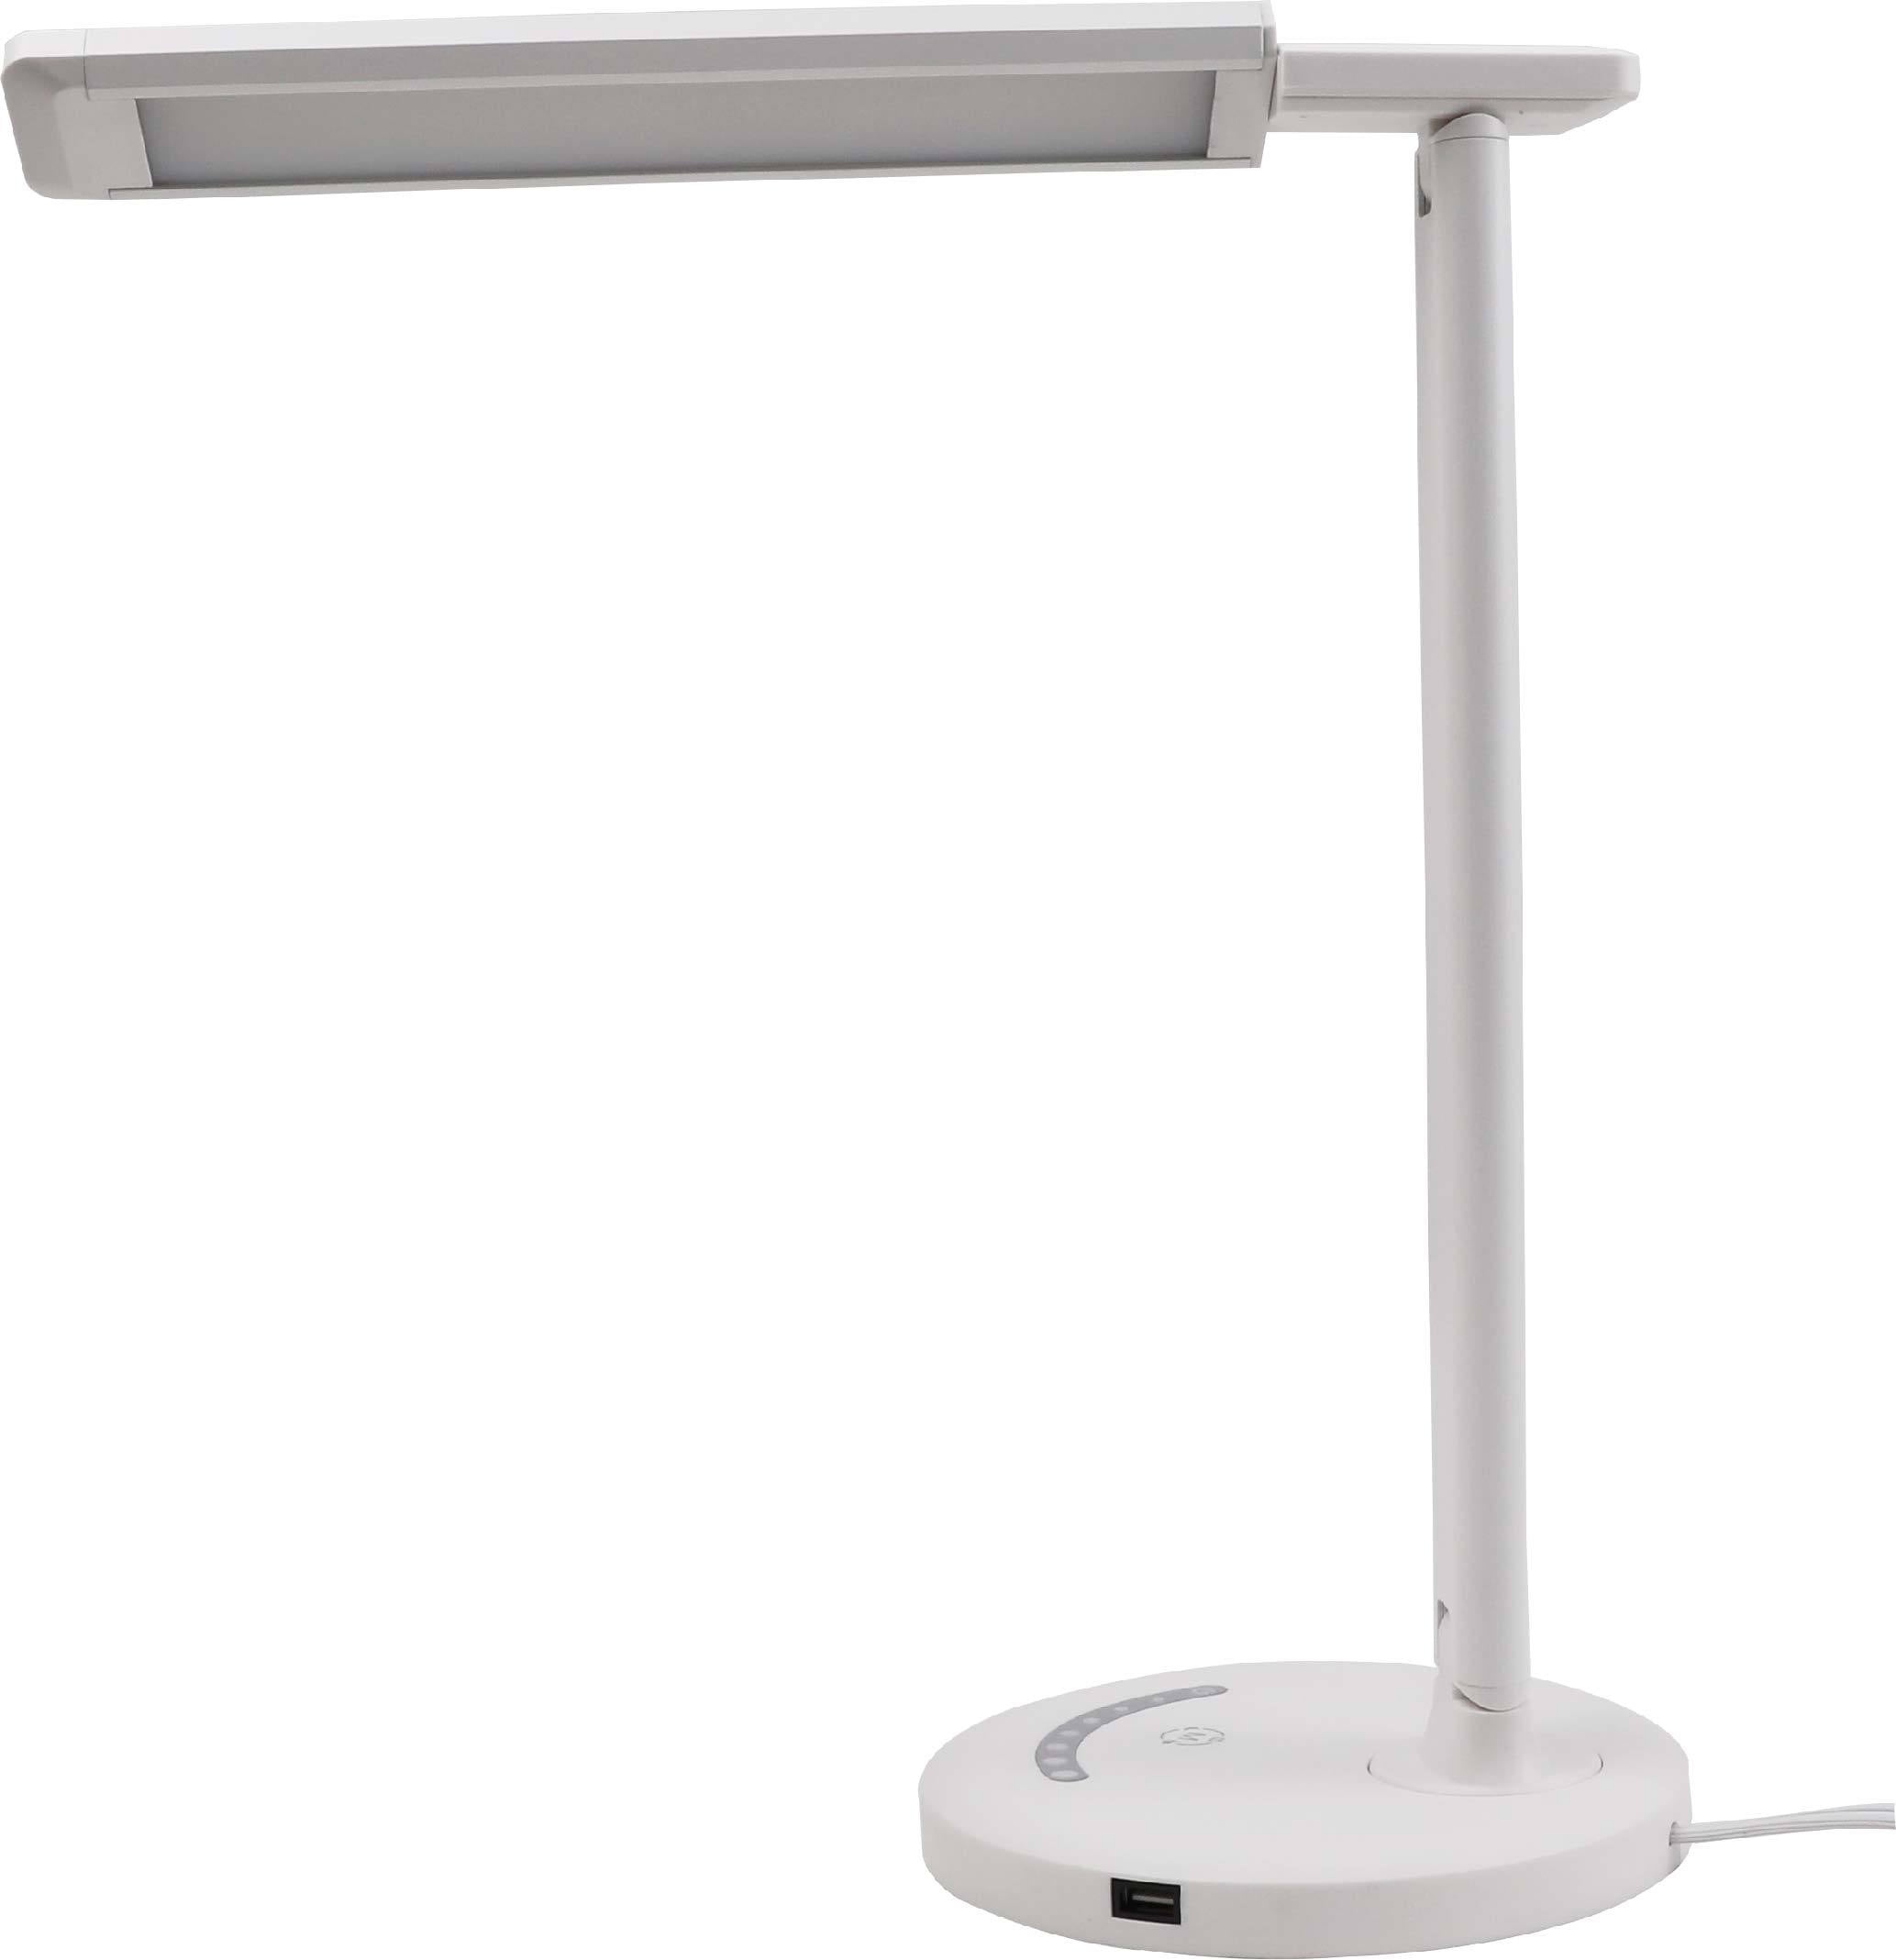 Table Light LED Desk Lamp With USB Charging Port Home Office Dimmable Lighting 